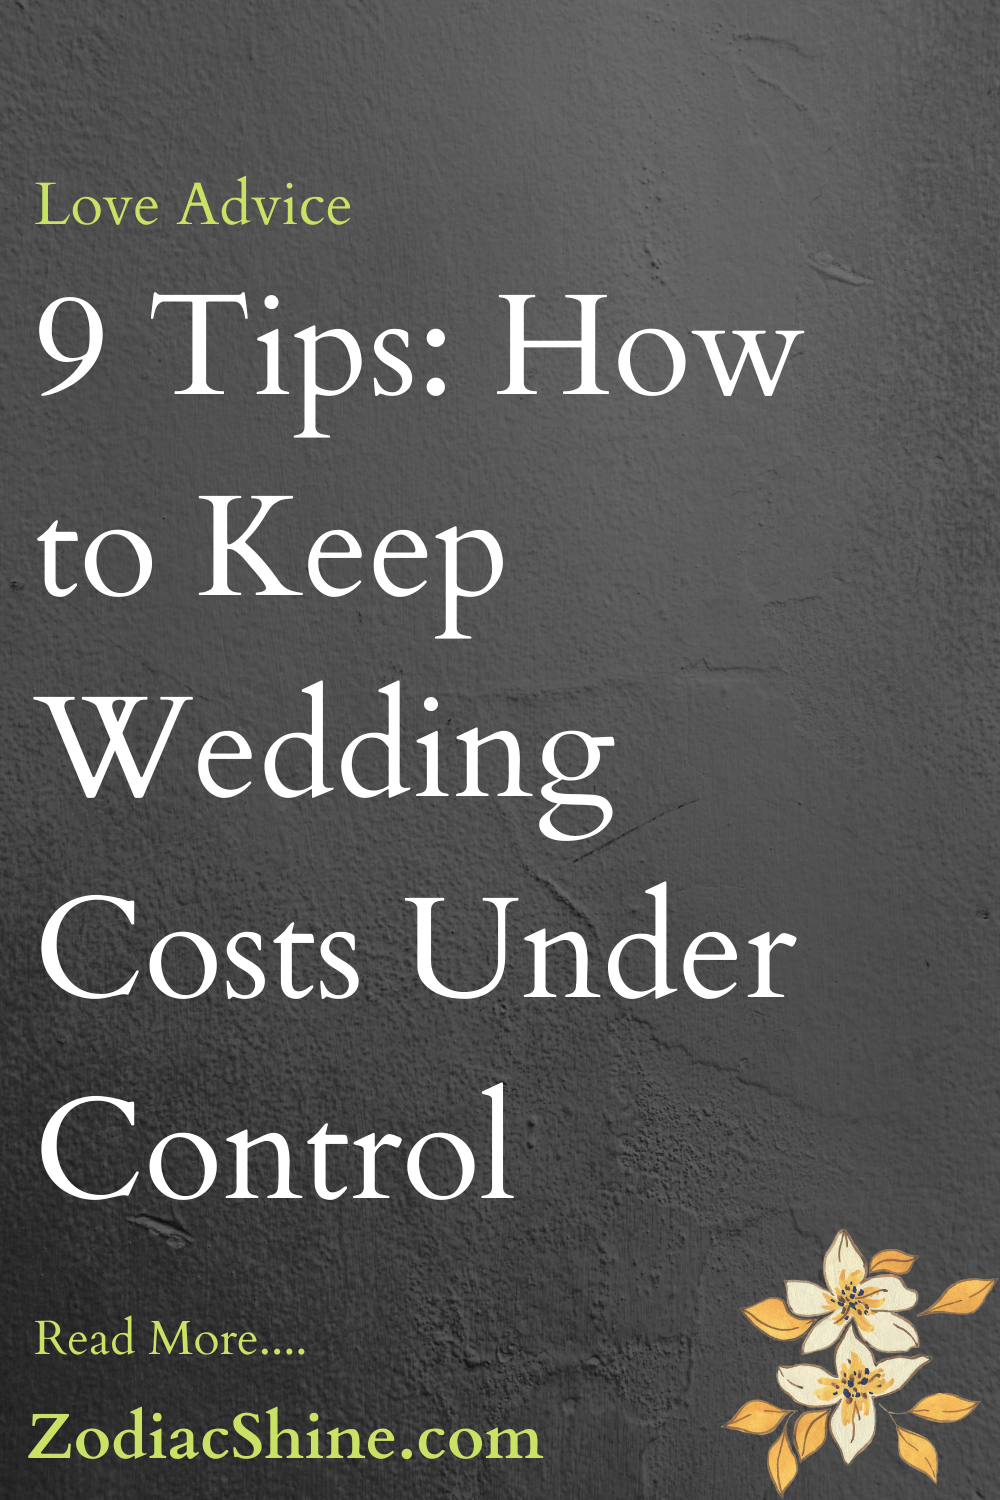 9 Tips: How to Keep Wedding Costs Under Control